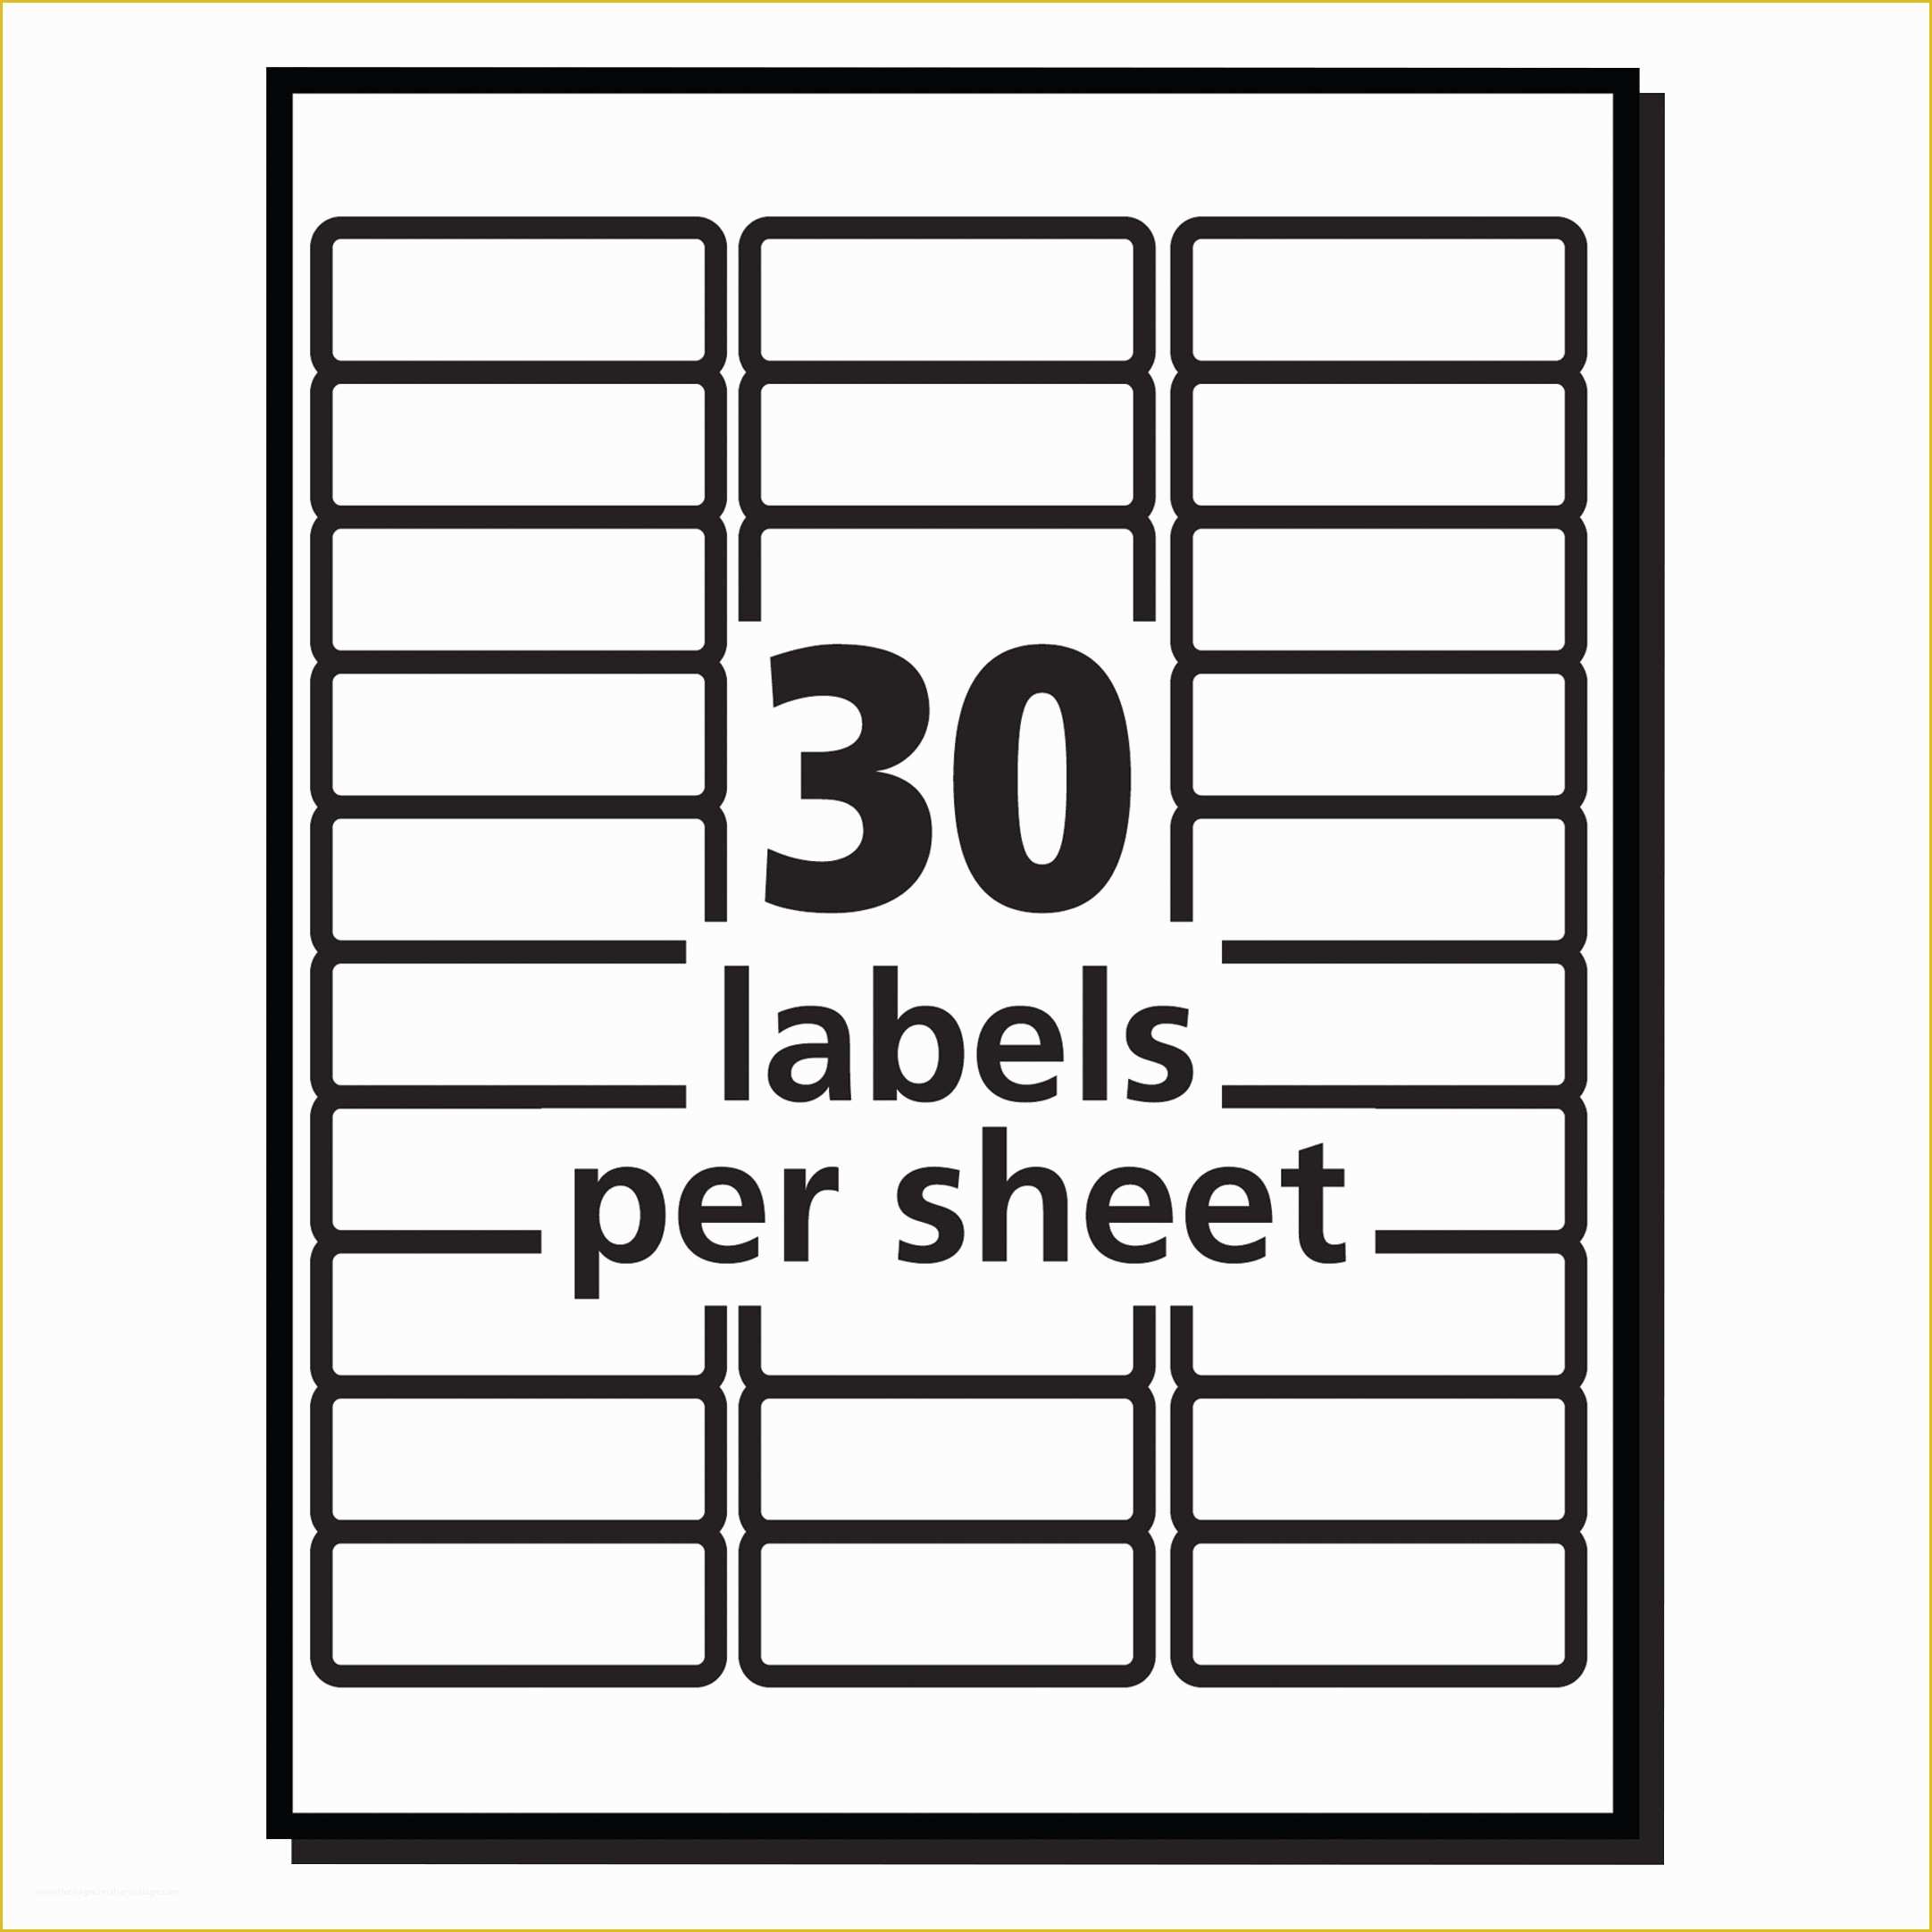 free-blank-label-templates-of-31-days-of-home-management-binder-printables-day-1-the